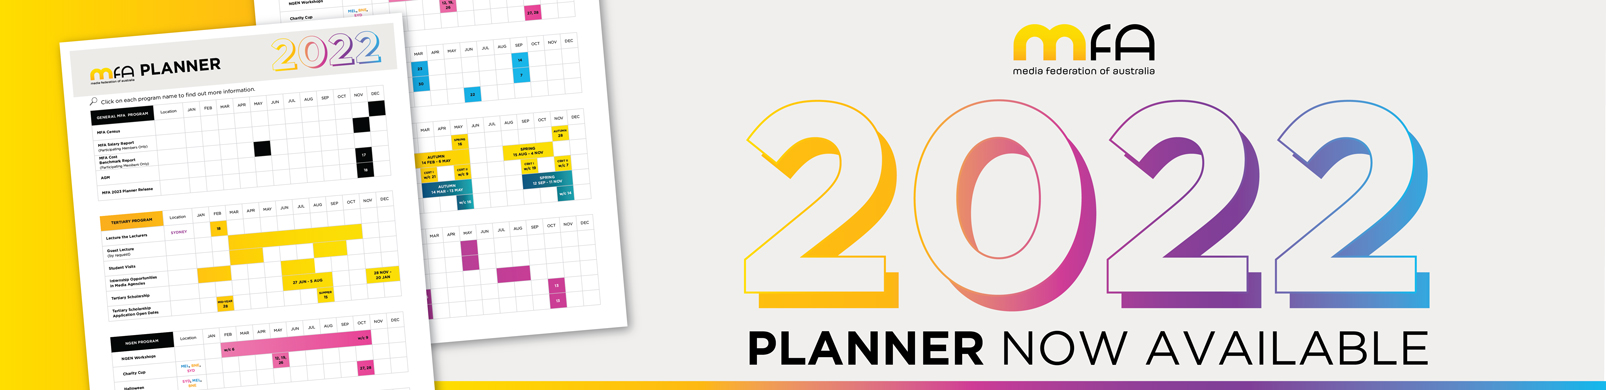 MFA_2022Planner_NowAvailable_Slider1600x390px